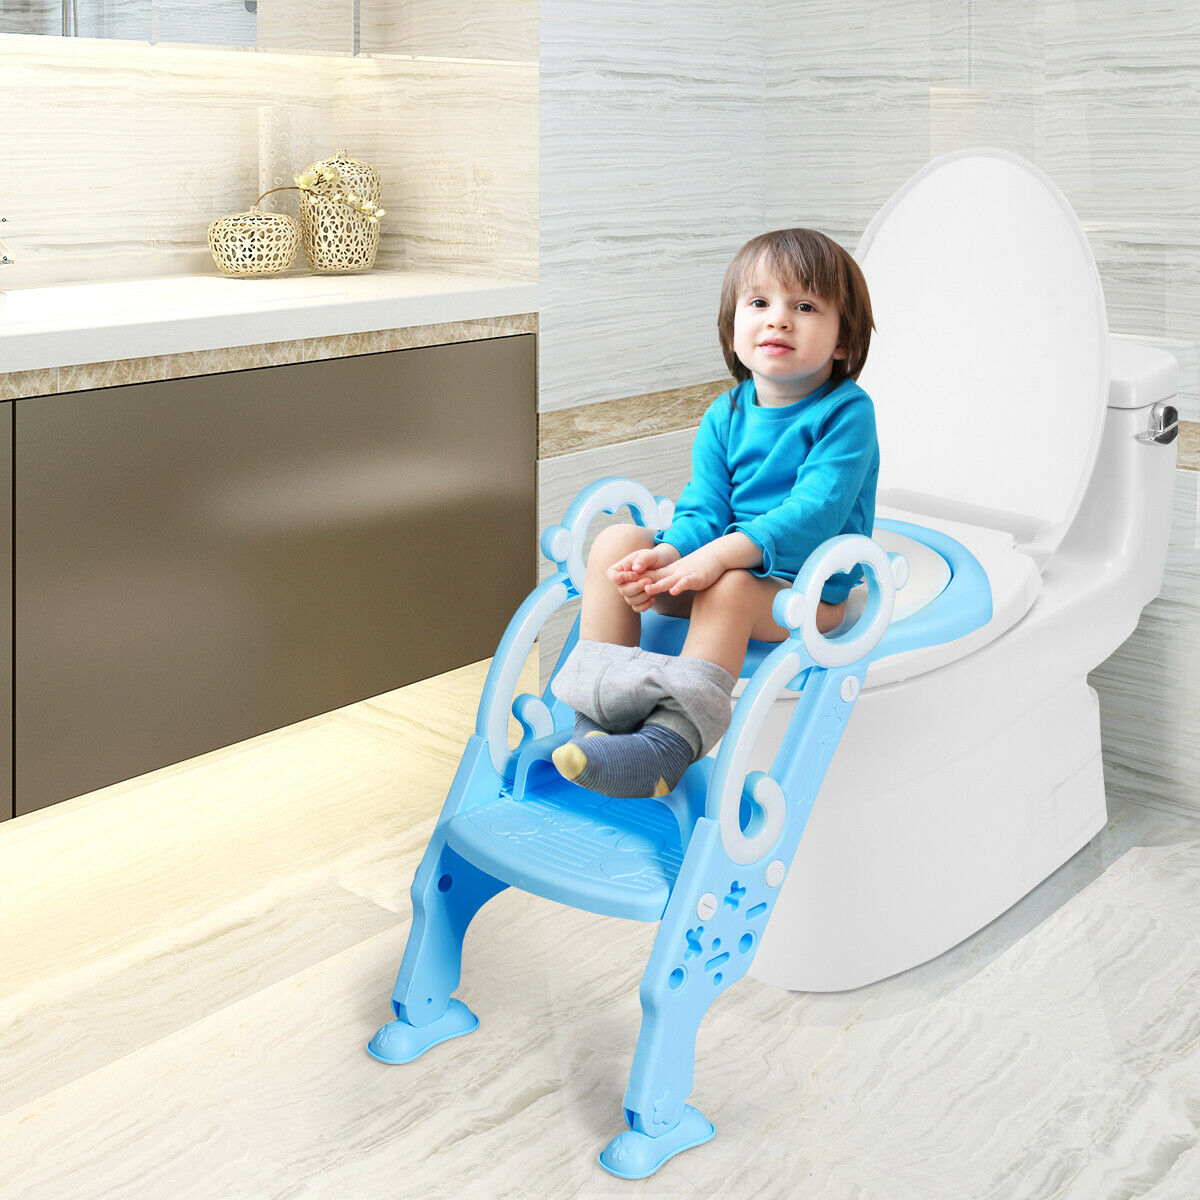 Portable Potty Training Toilet Seat W/ Step Stool Ladder Adjustable For Kids